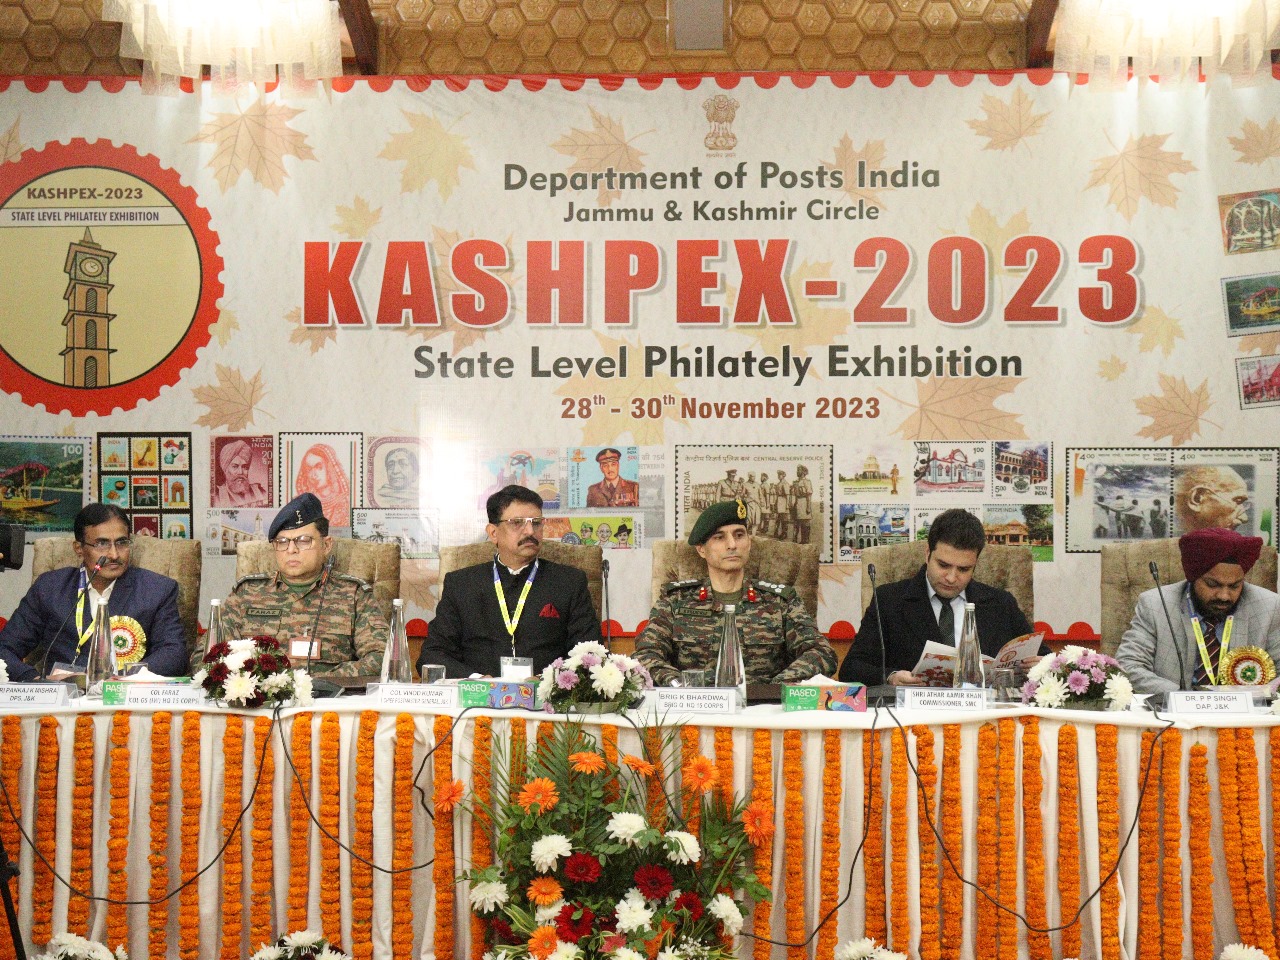 'Three day State Level Philatelic Exhibition “KASHPEX-2023” inaugurated at SKICC  Approx. 50,000 postage stamps, other Philatelic items on Display  KASHPEX-2023 open to general public from 11 AM to 04 PM   '